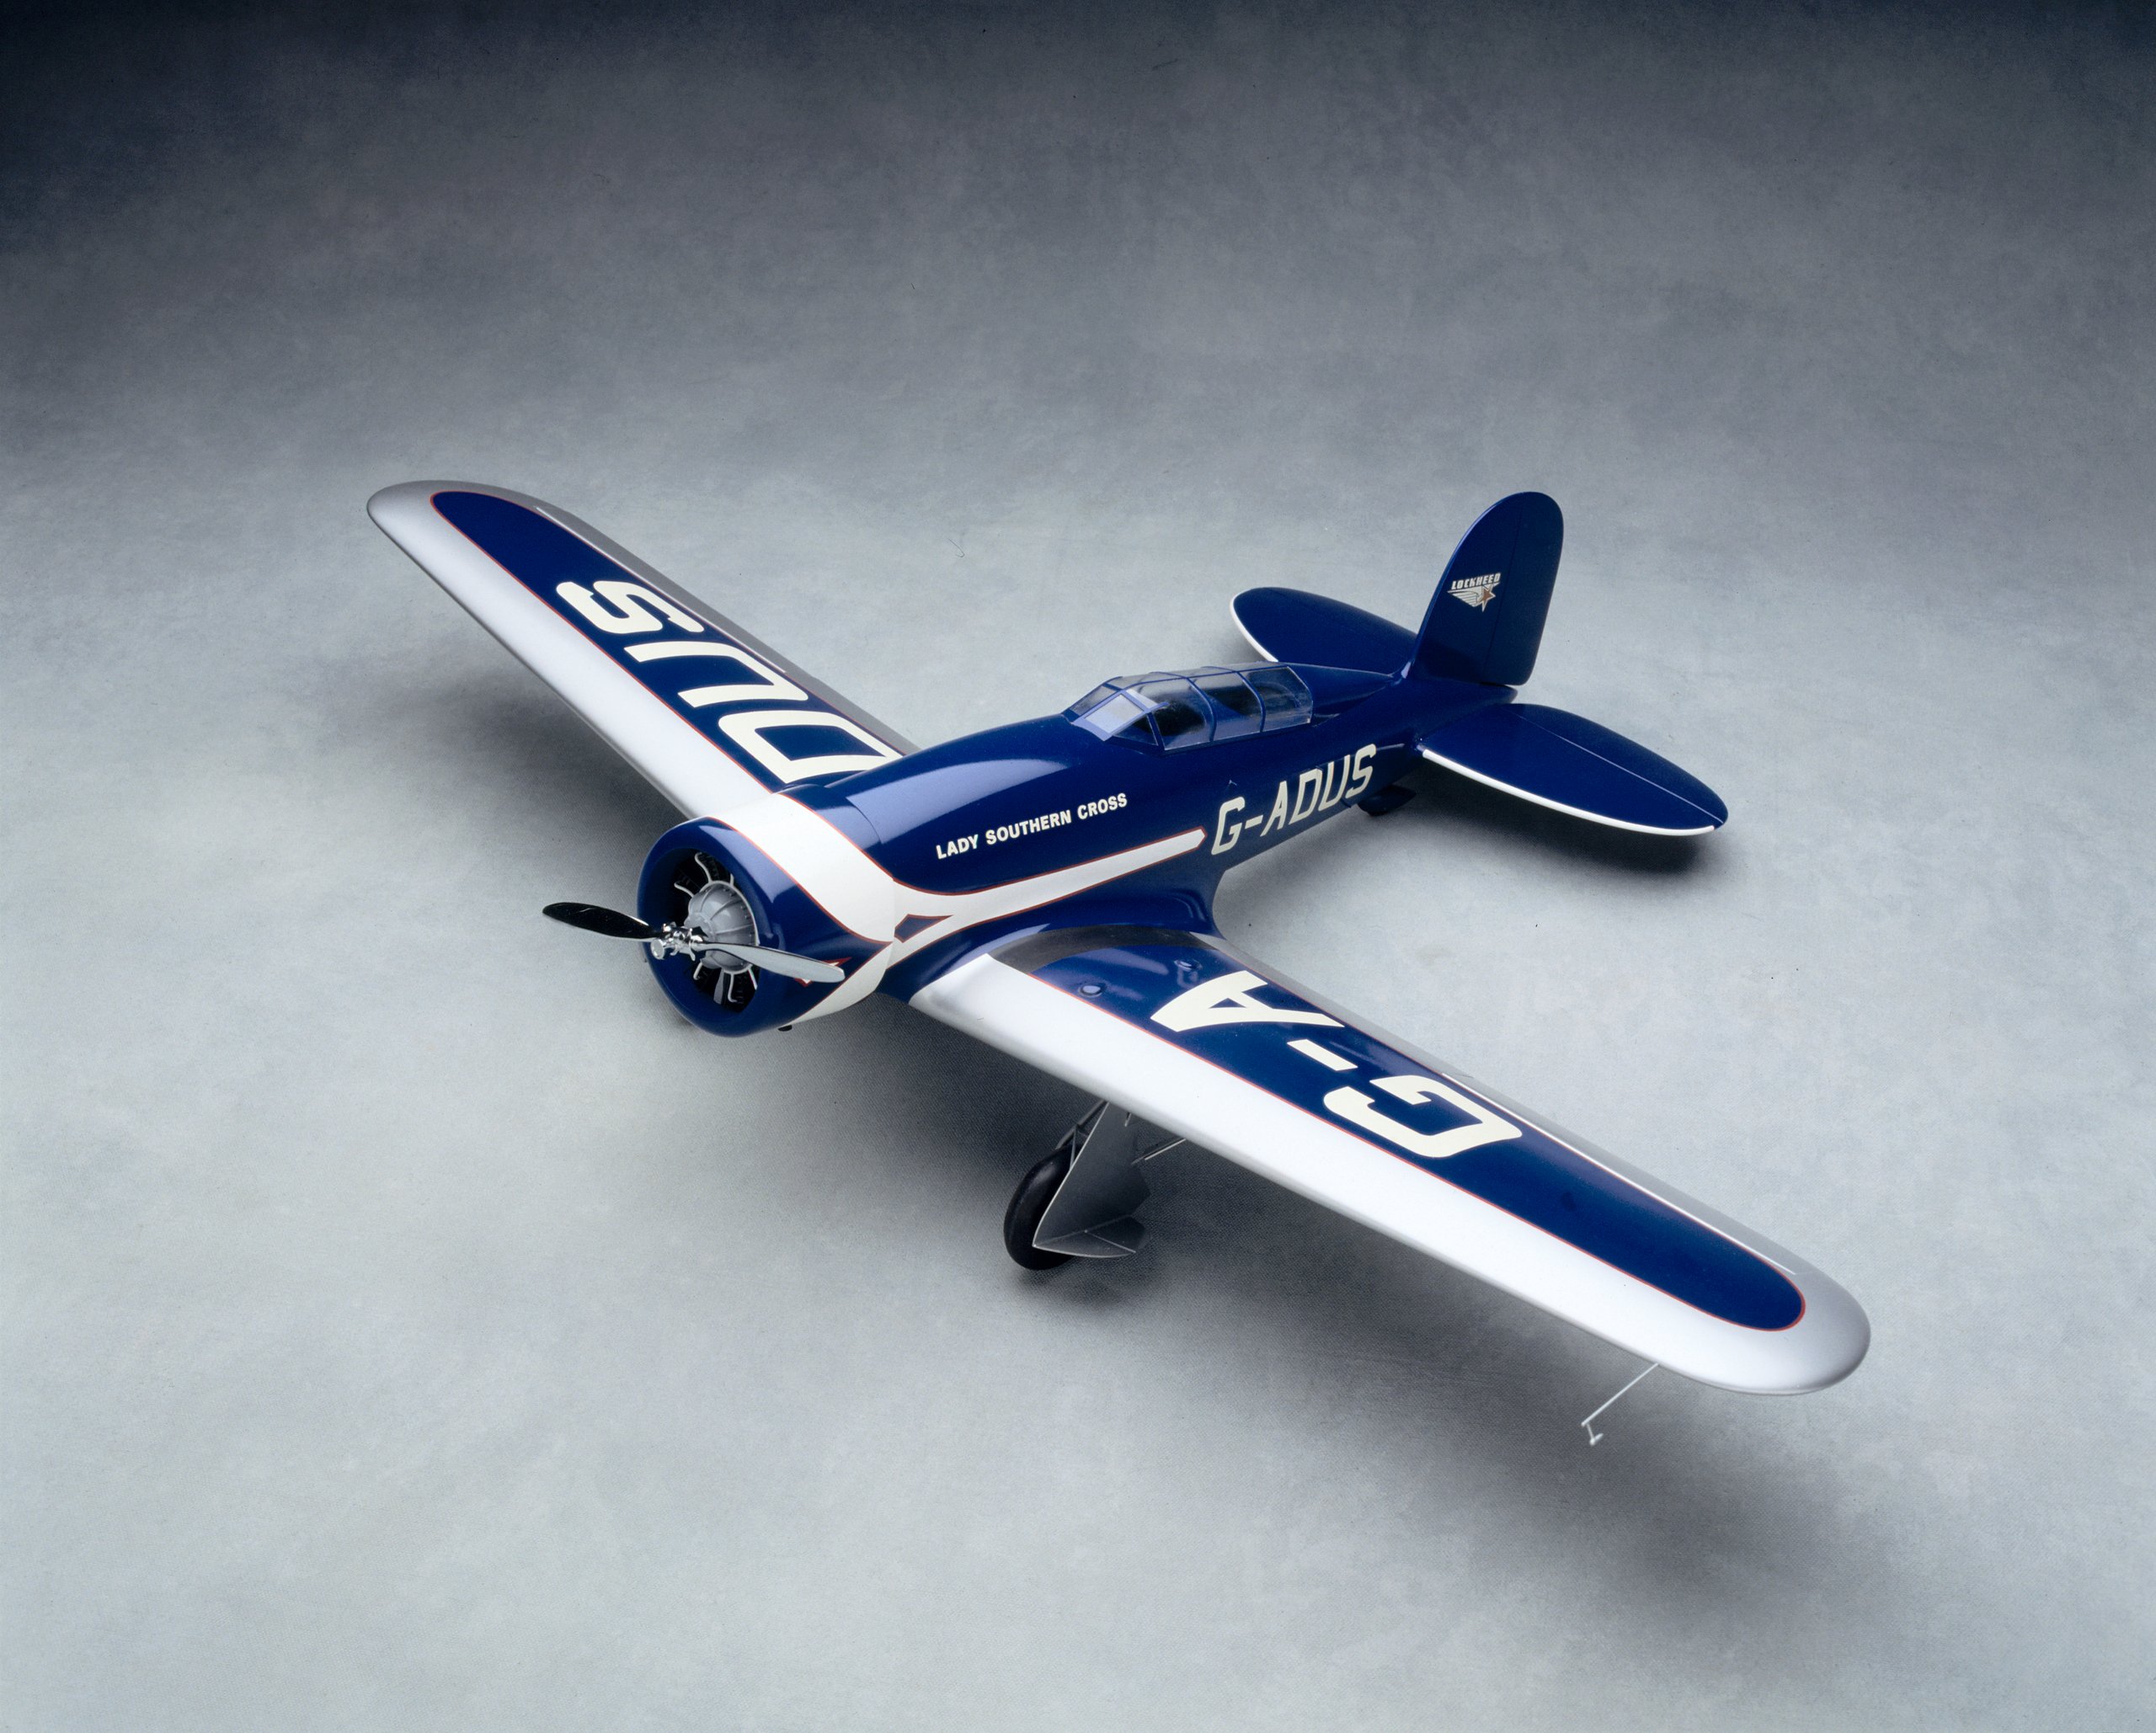 Model of 'Lady Southern Cross' aircraft